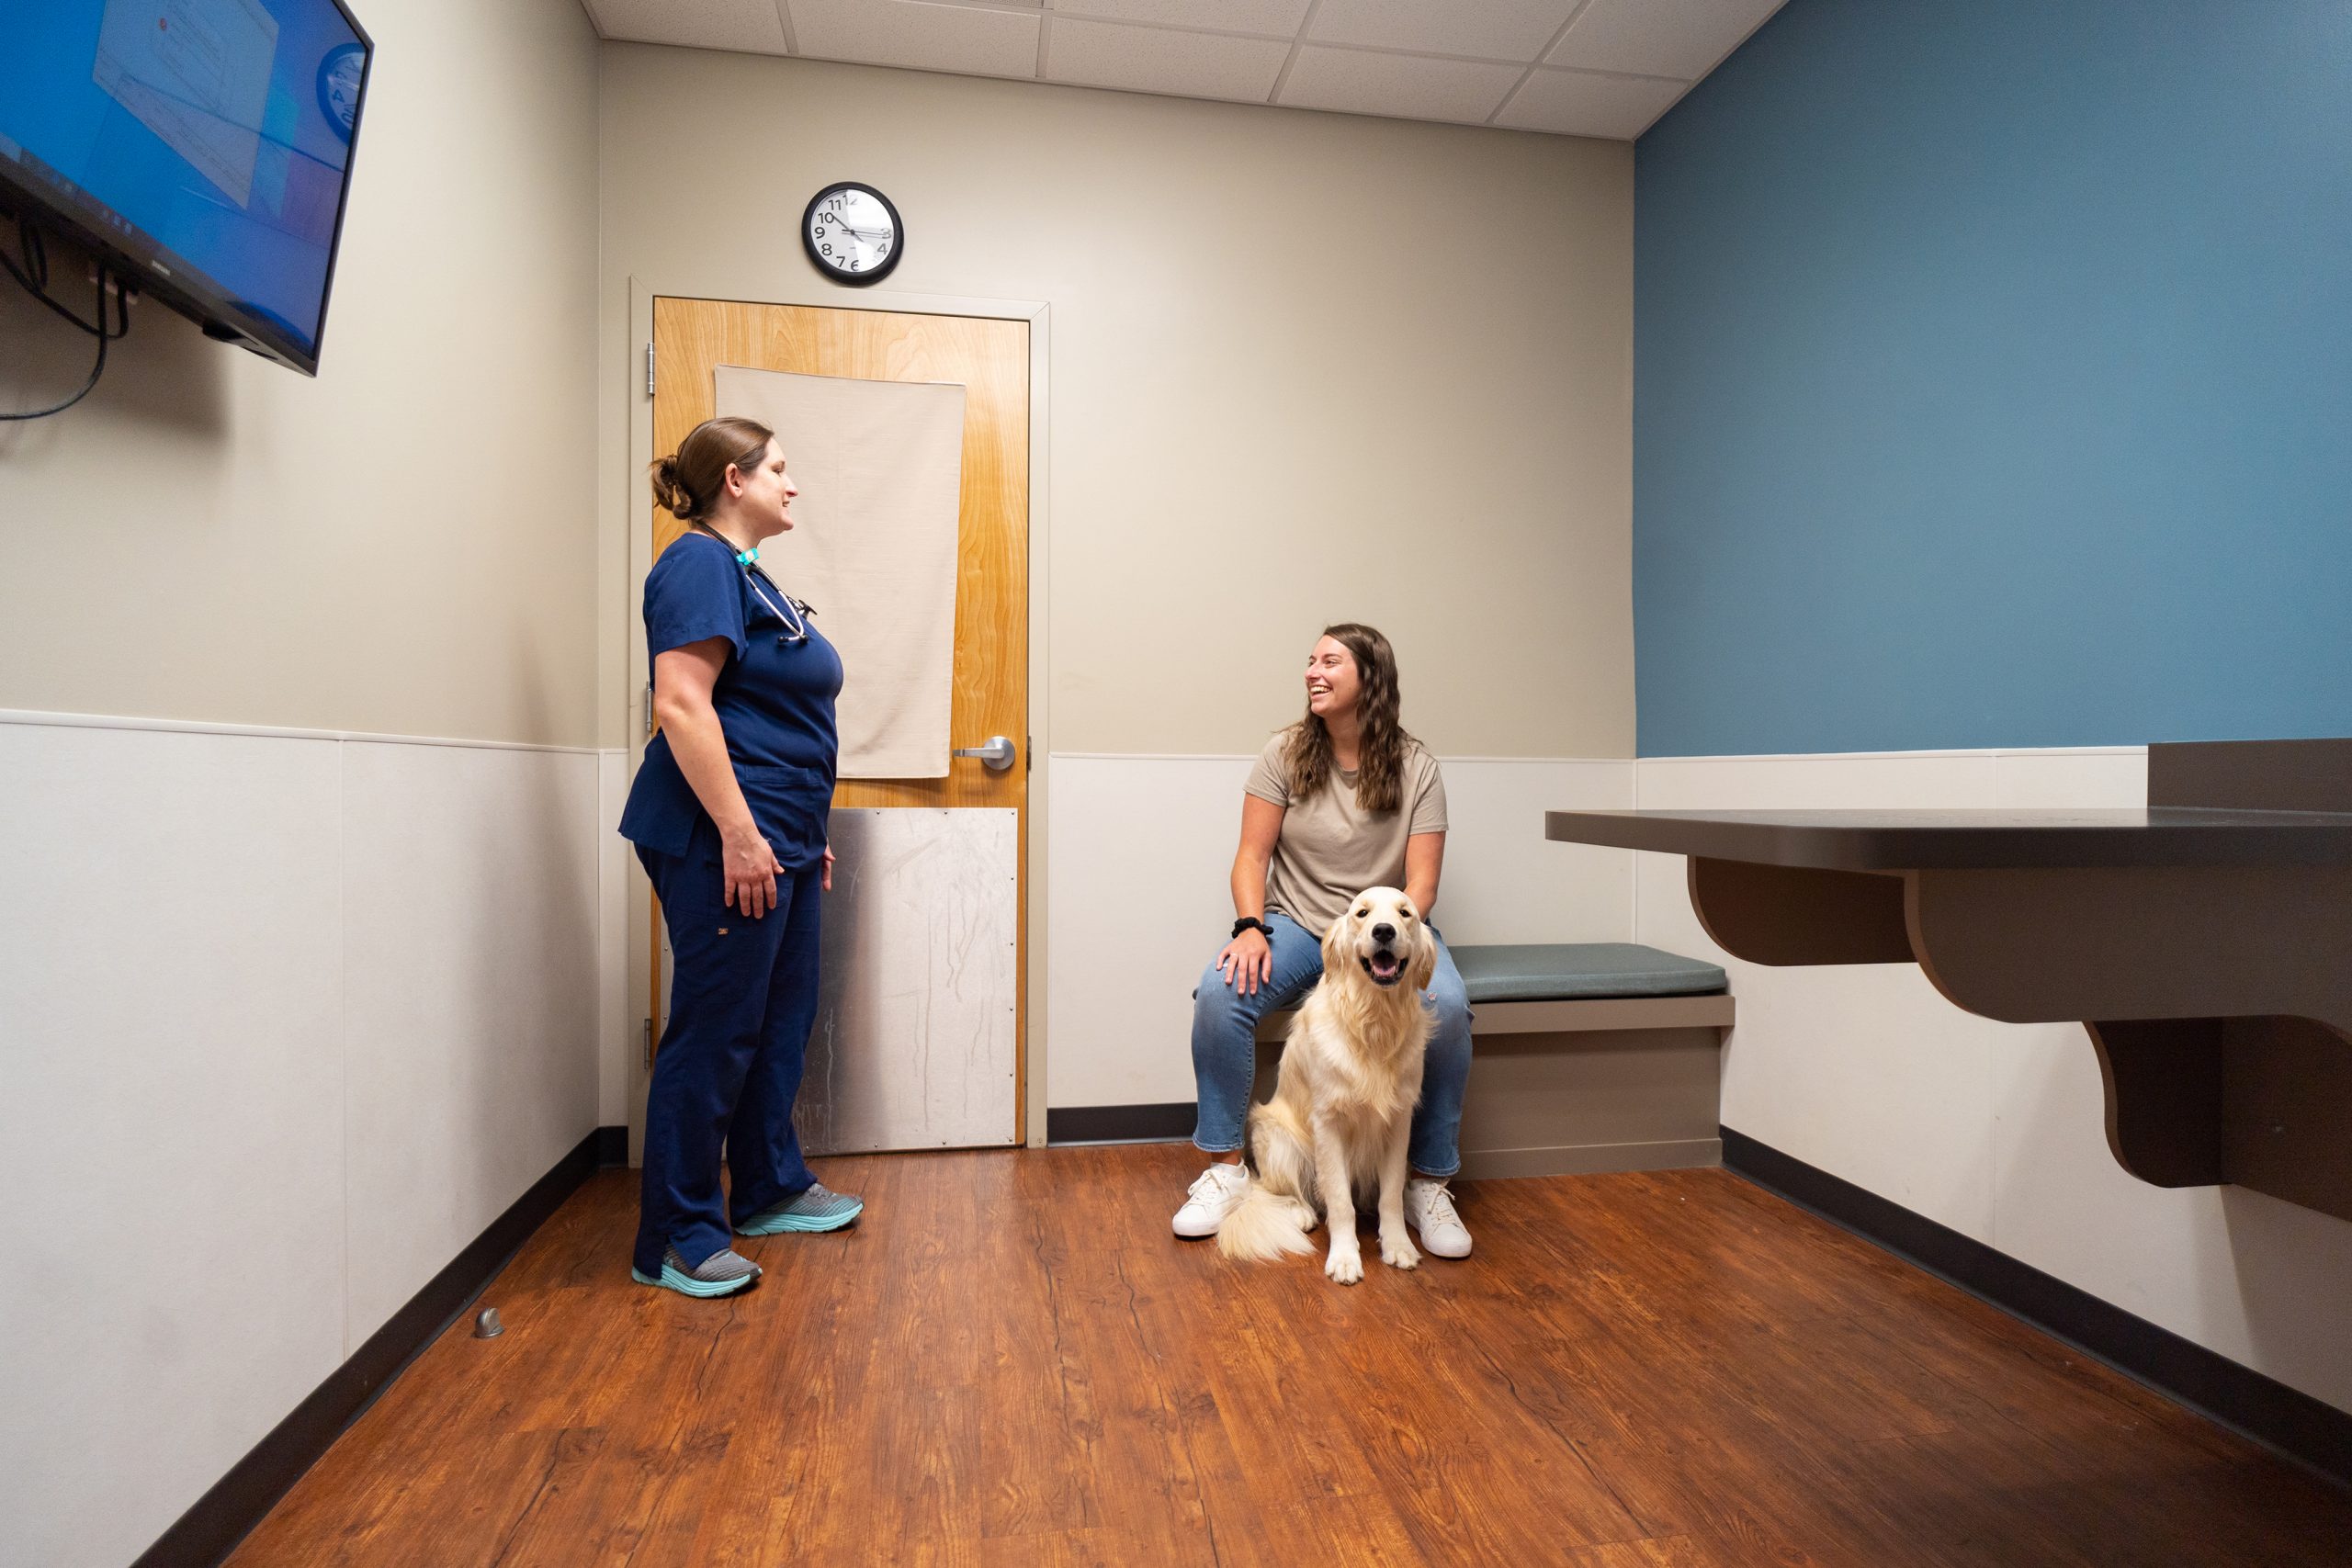 Veterinarian consulting with patient and her golden retriever